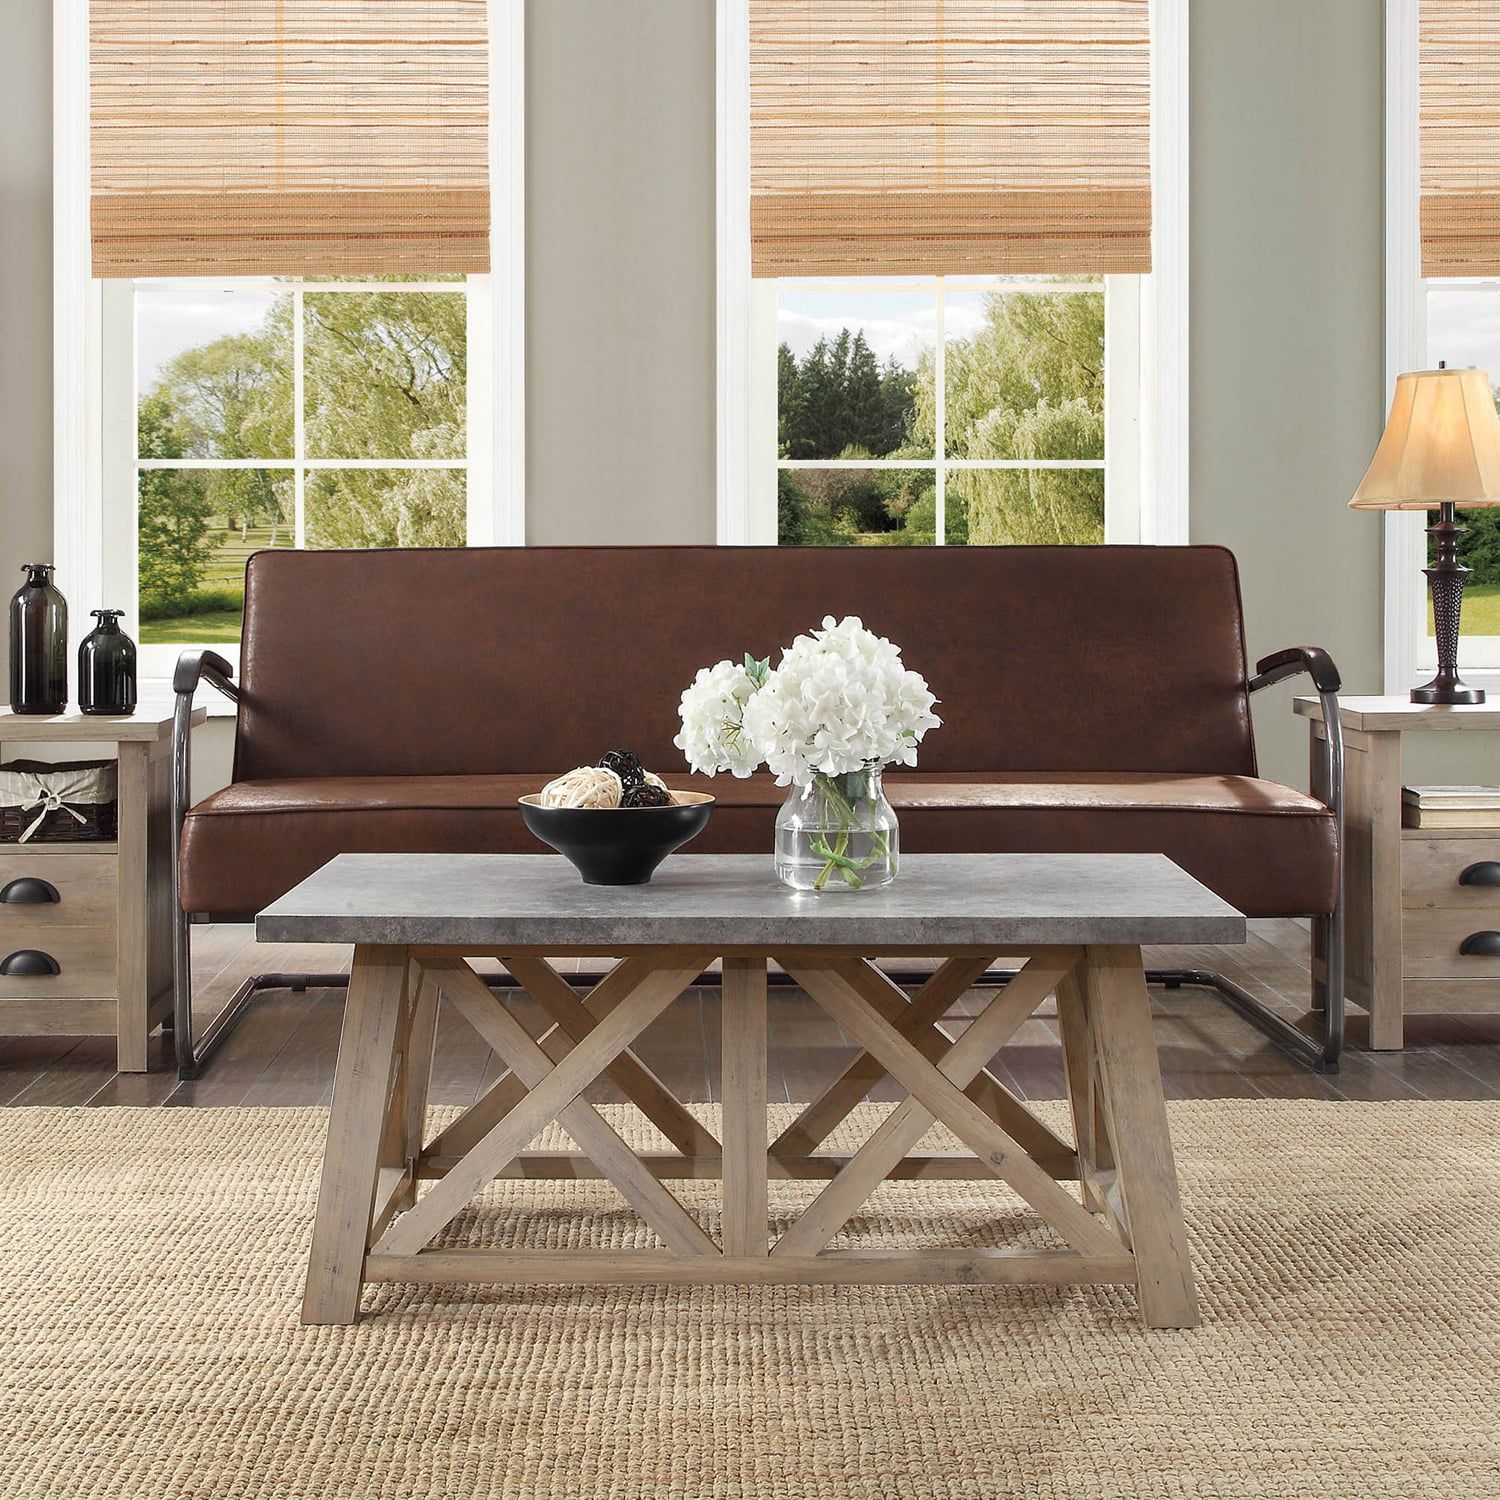 Better Homes & Gardens Granary Modern Farmhouse Coffee Table, Multiple Throughout Modern Farmhouse Coffee Tables (View 4 of 20)